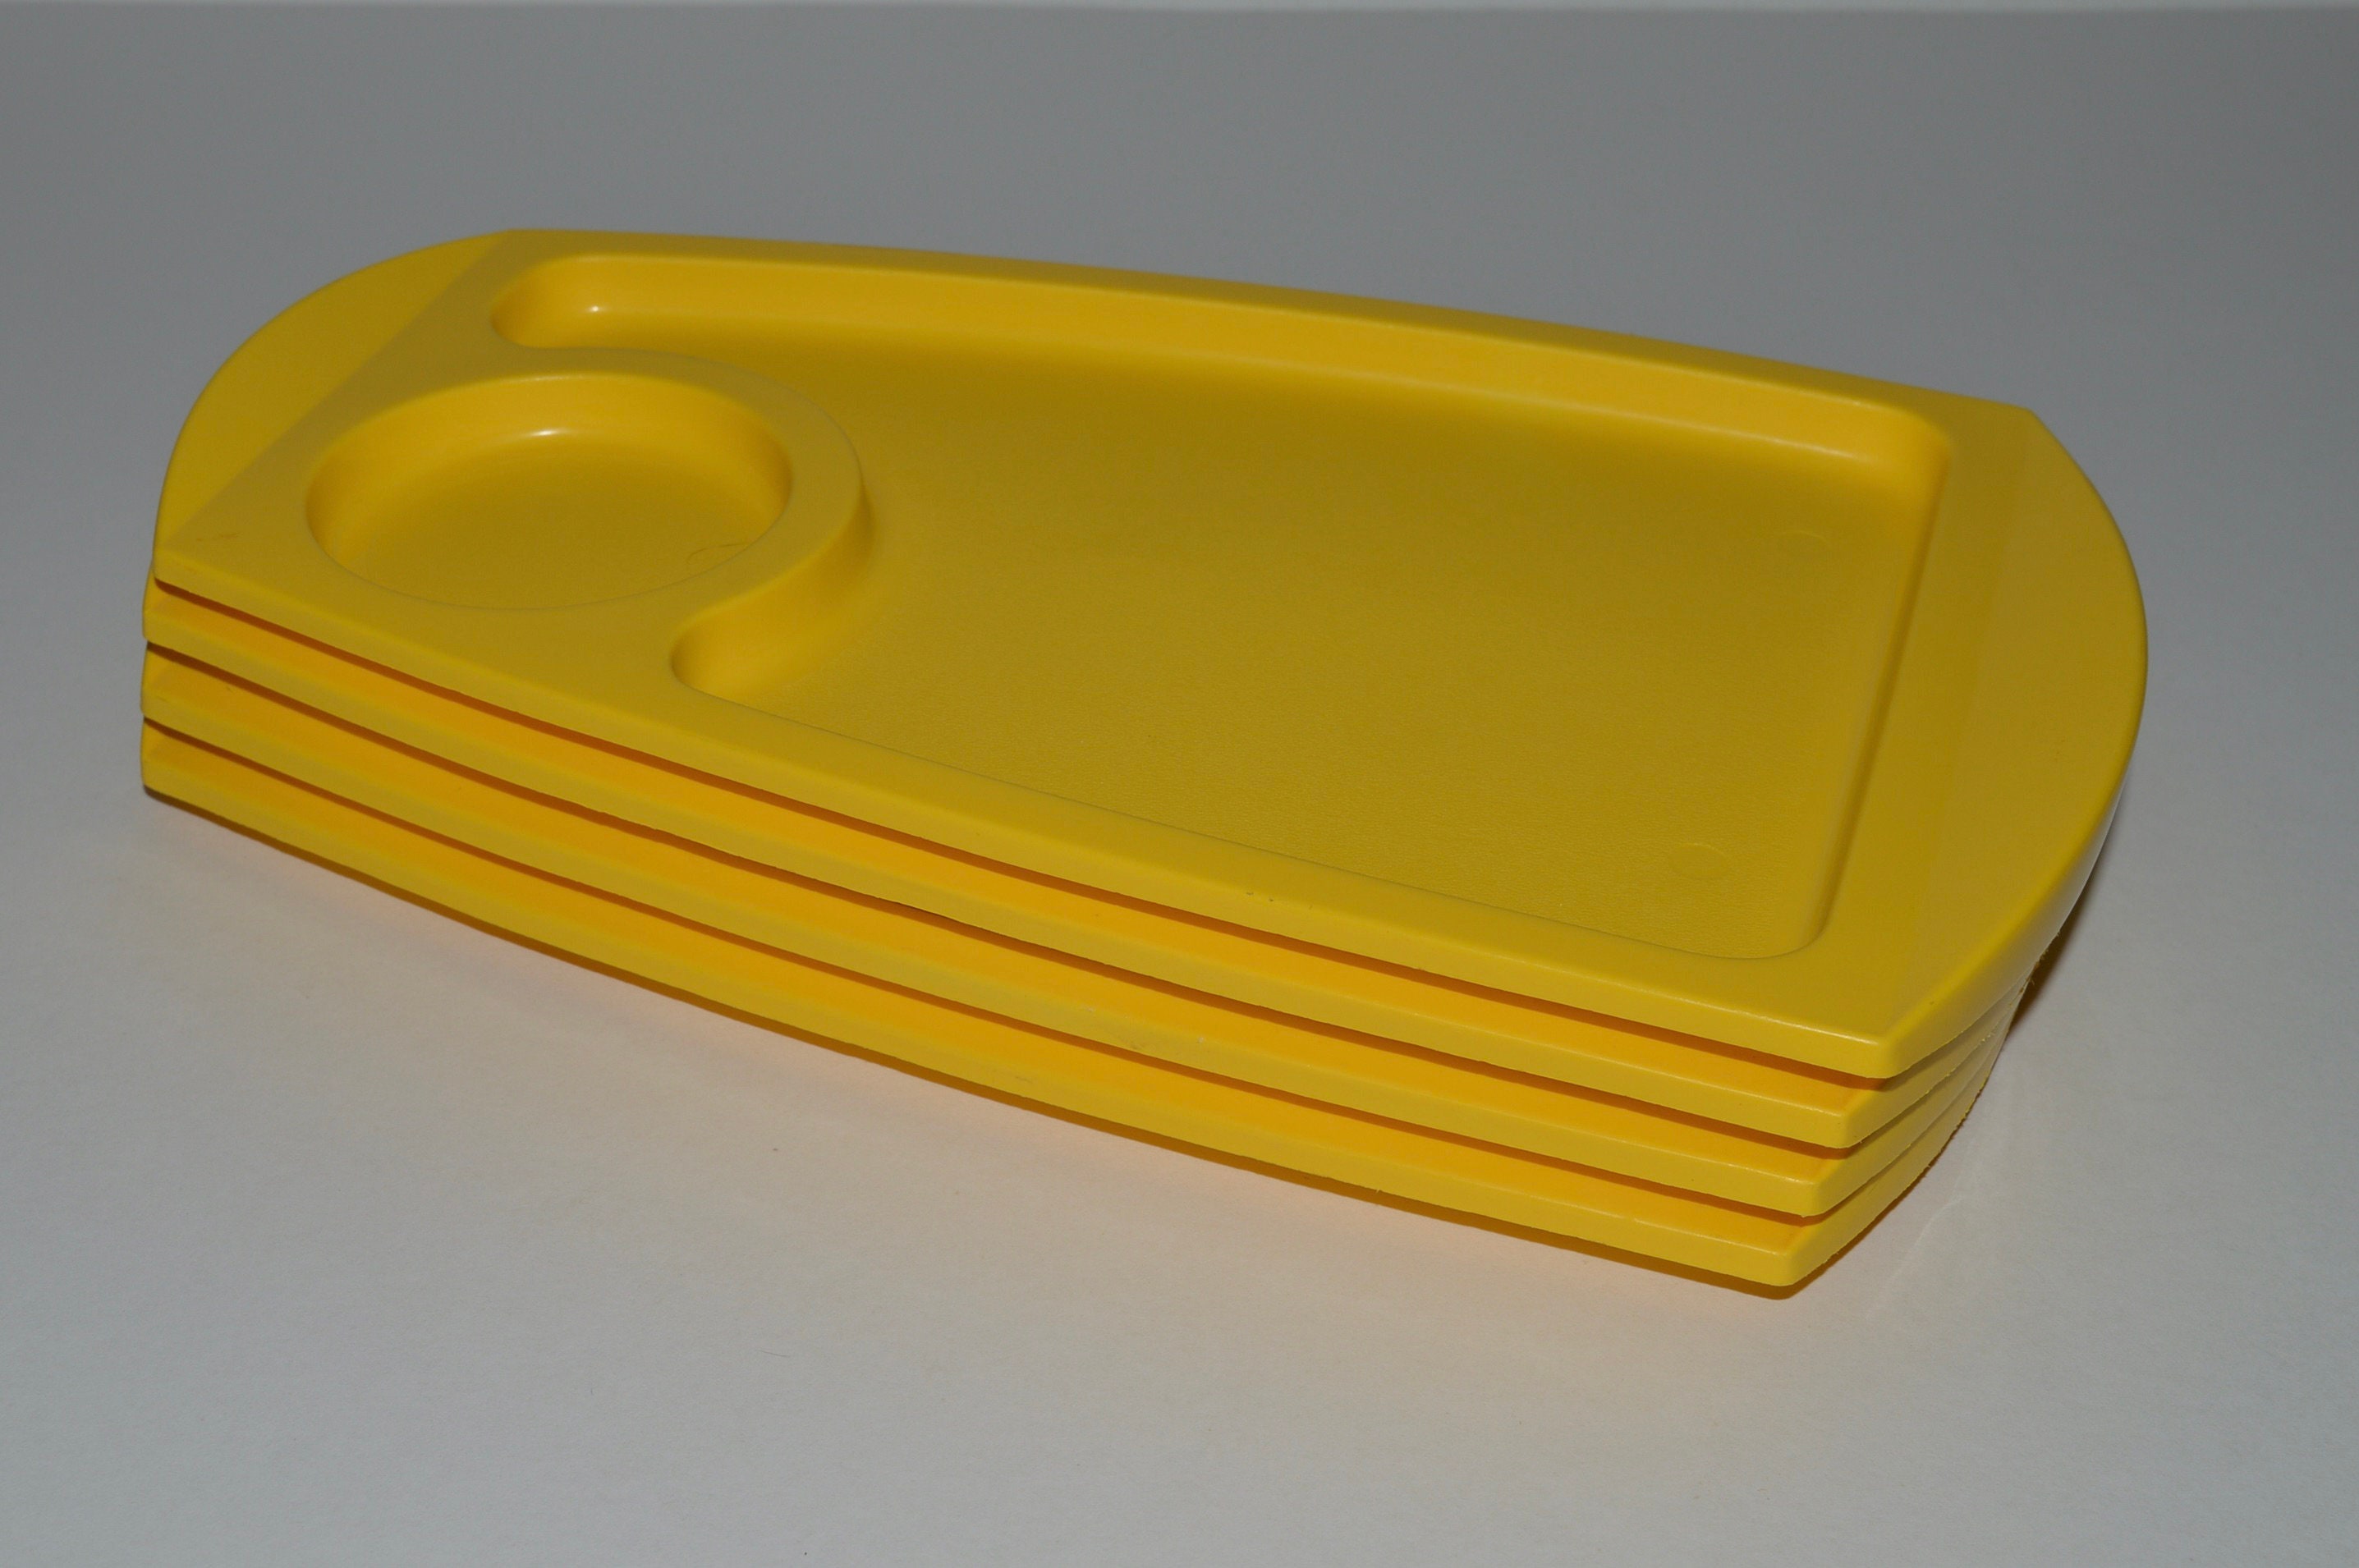 2 Vintage Tupperware Model Number 1436 in Brown and Yellow Made in Belgium,  Retro Kitchen Storage Accessory France, Picnic Basket Container